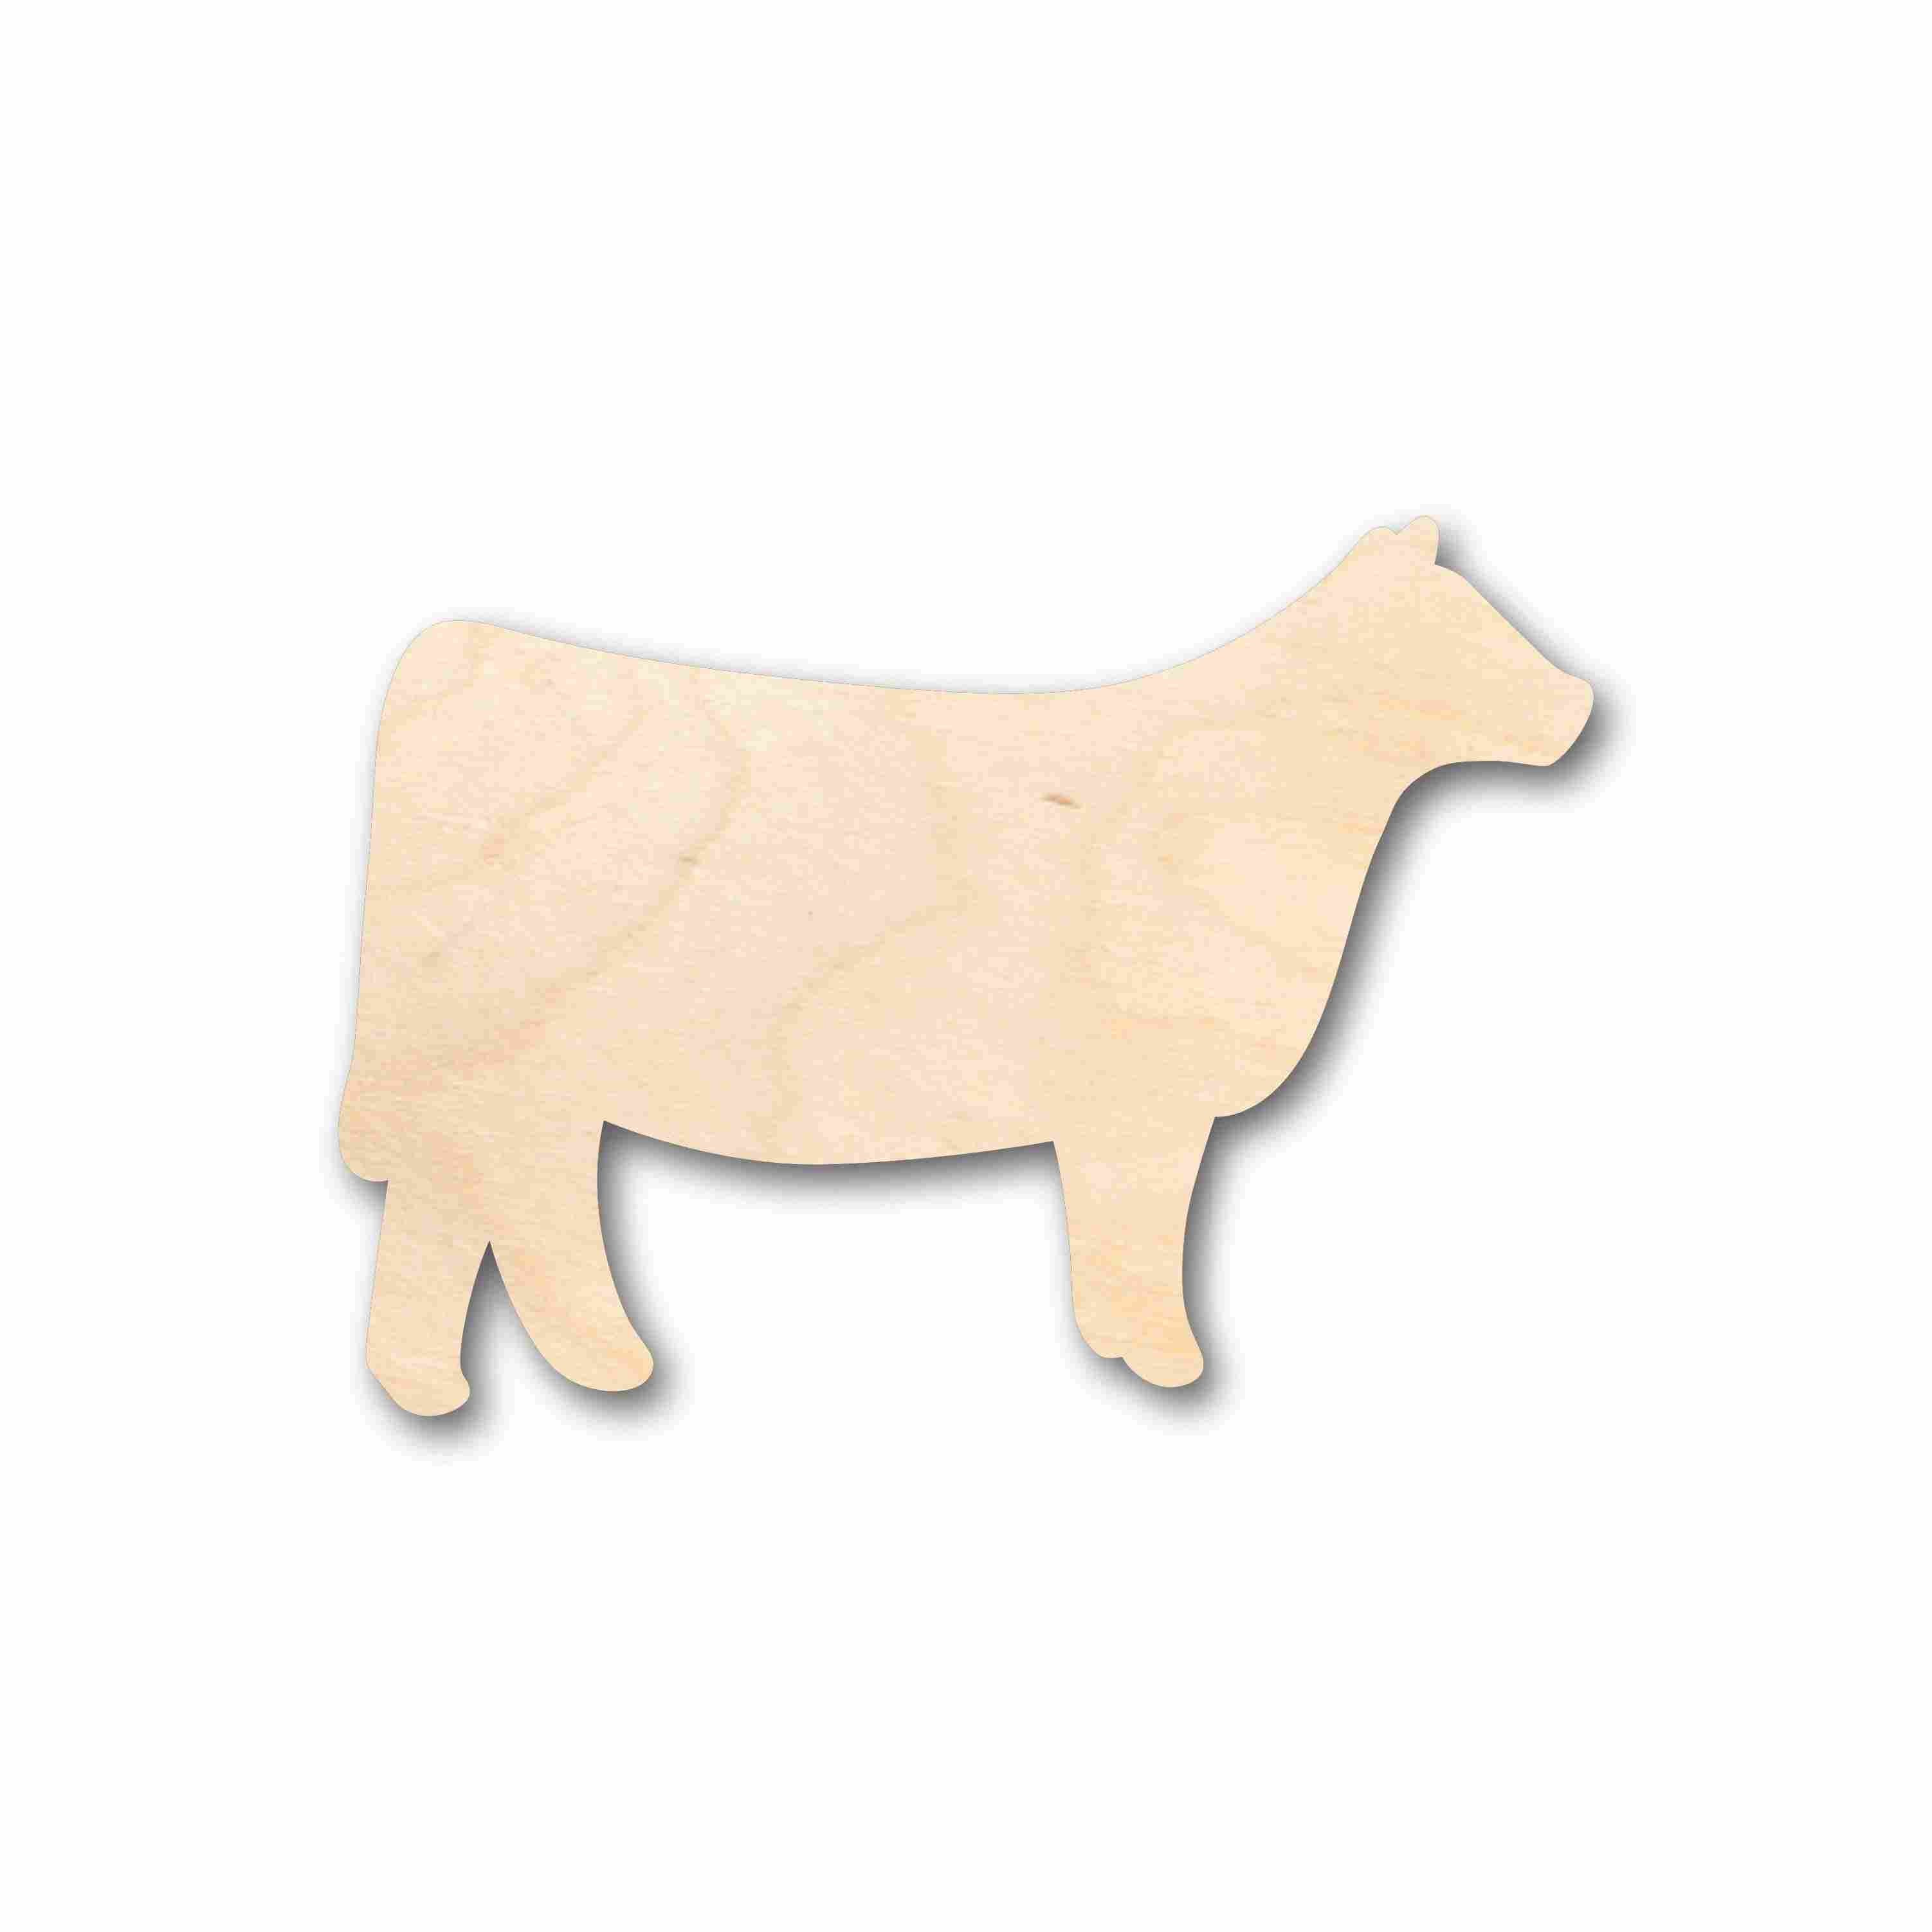 Unfinished Wood Cow Calf Silhouette - Craft- up to 24